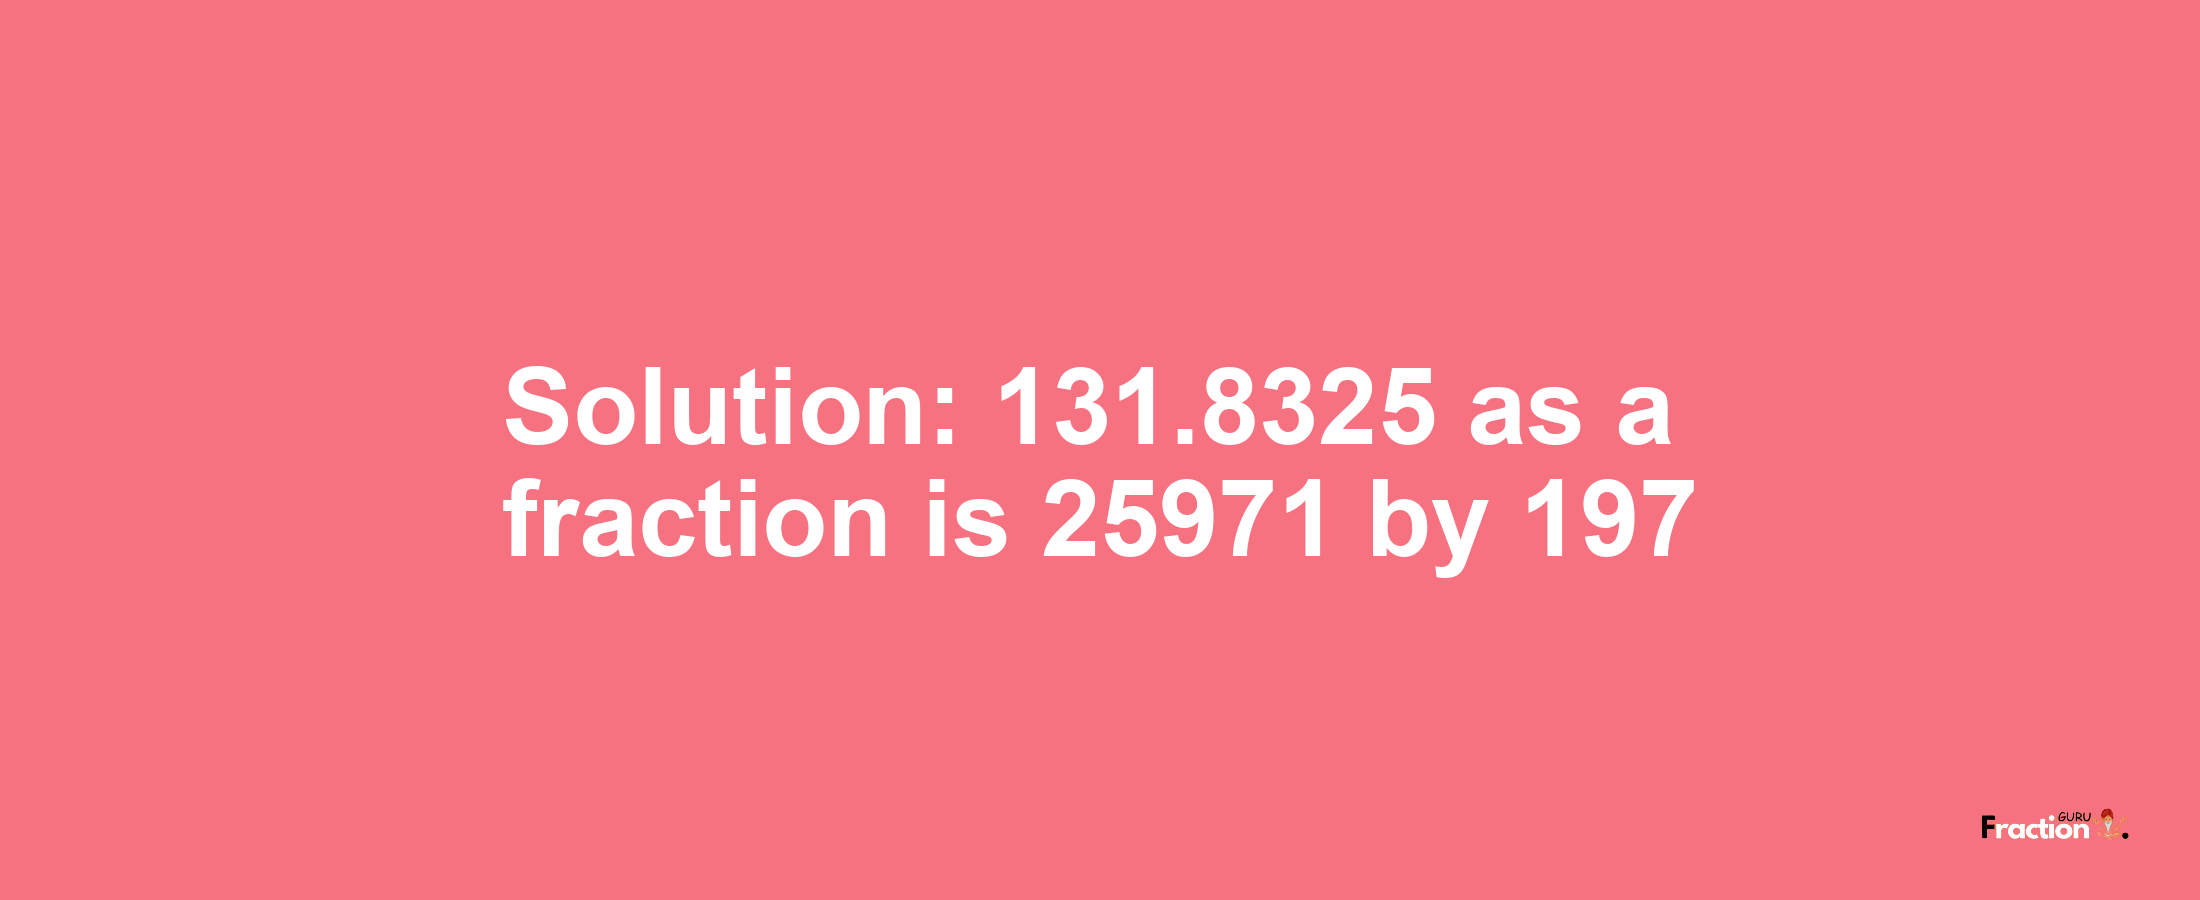 Solution:131.8325 as a fraction is 25971/197